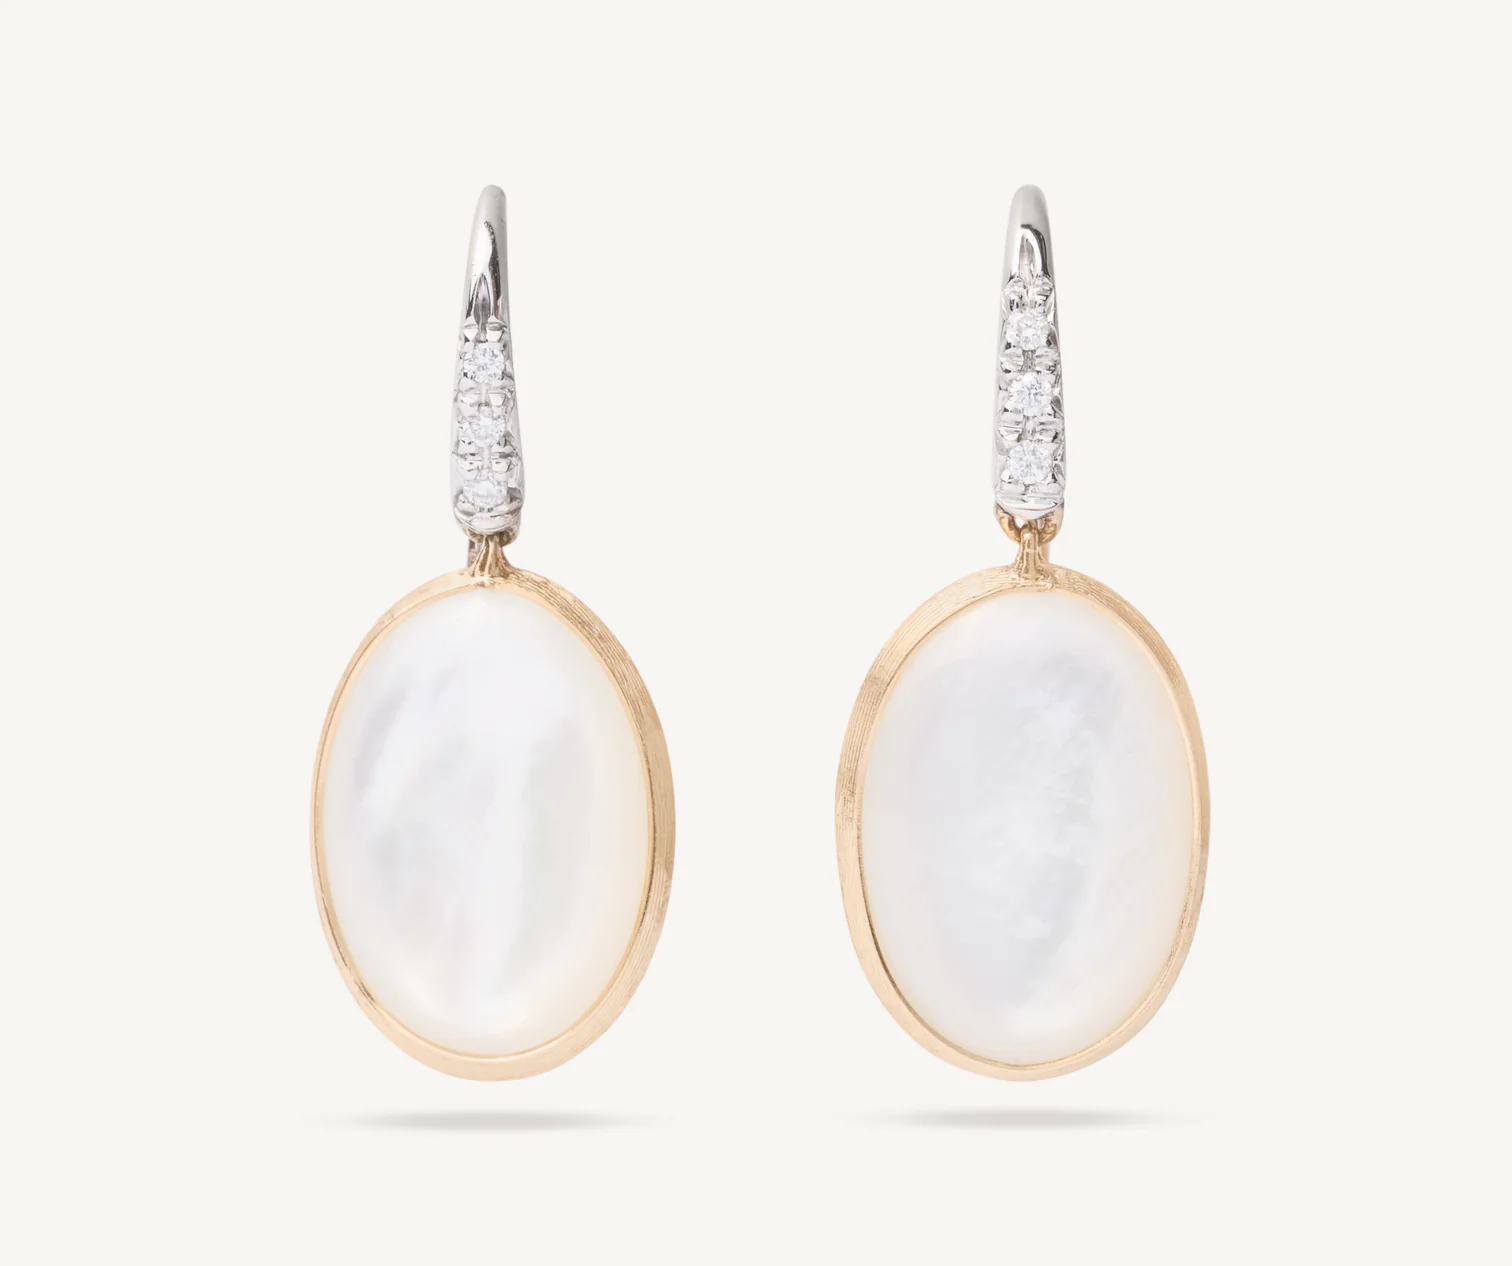 Marco Bicego Siviglia Mother of Pearl 18k Gold and Diamond French Hook Earrings - Orsini Jewellers